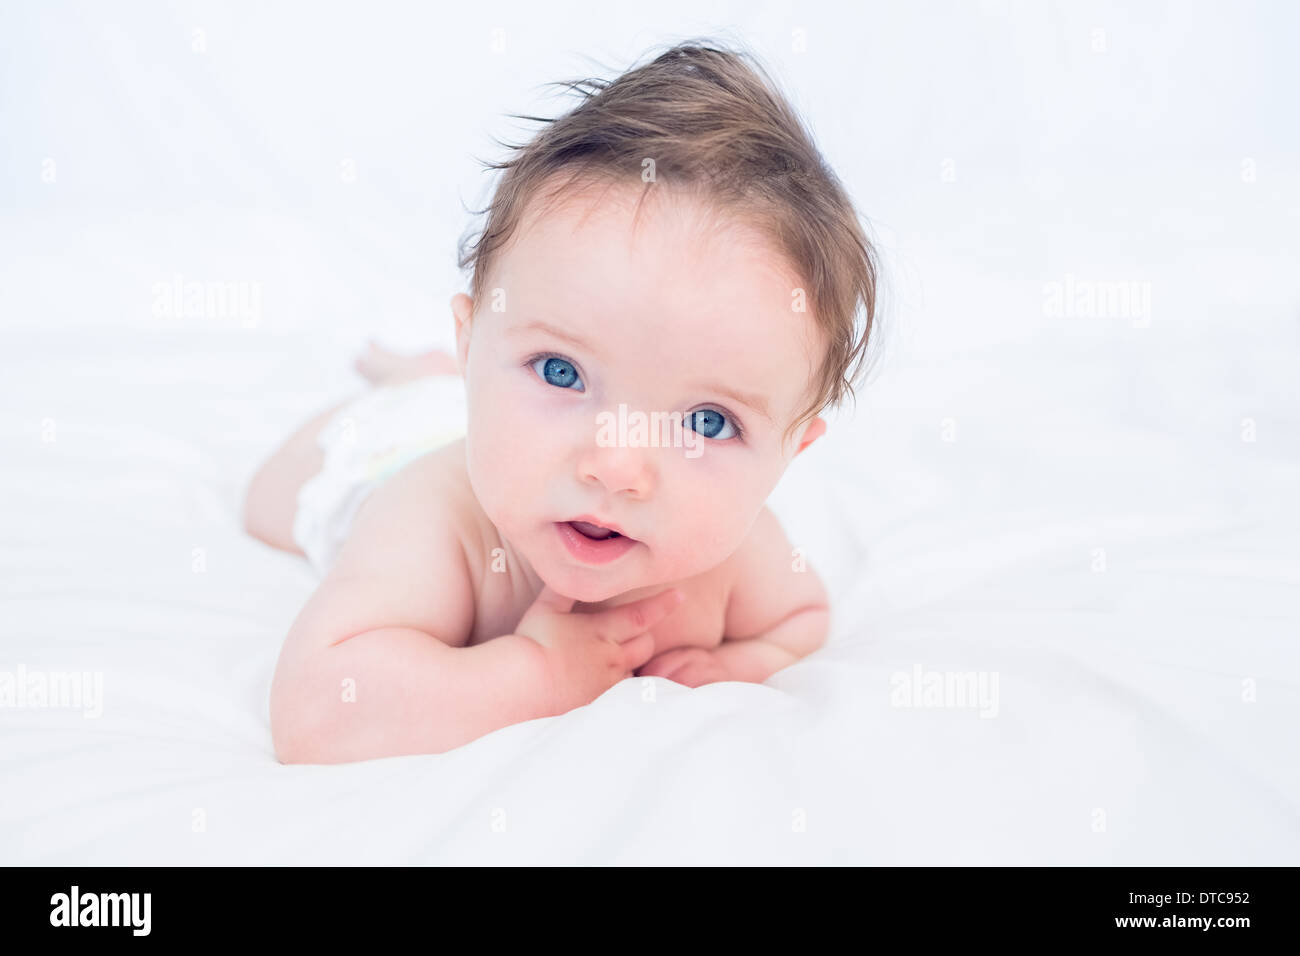 Baby with blue eyes looking away Stock Photo